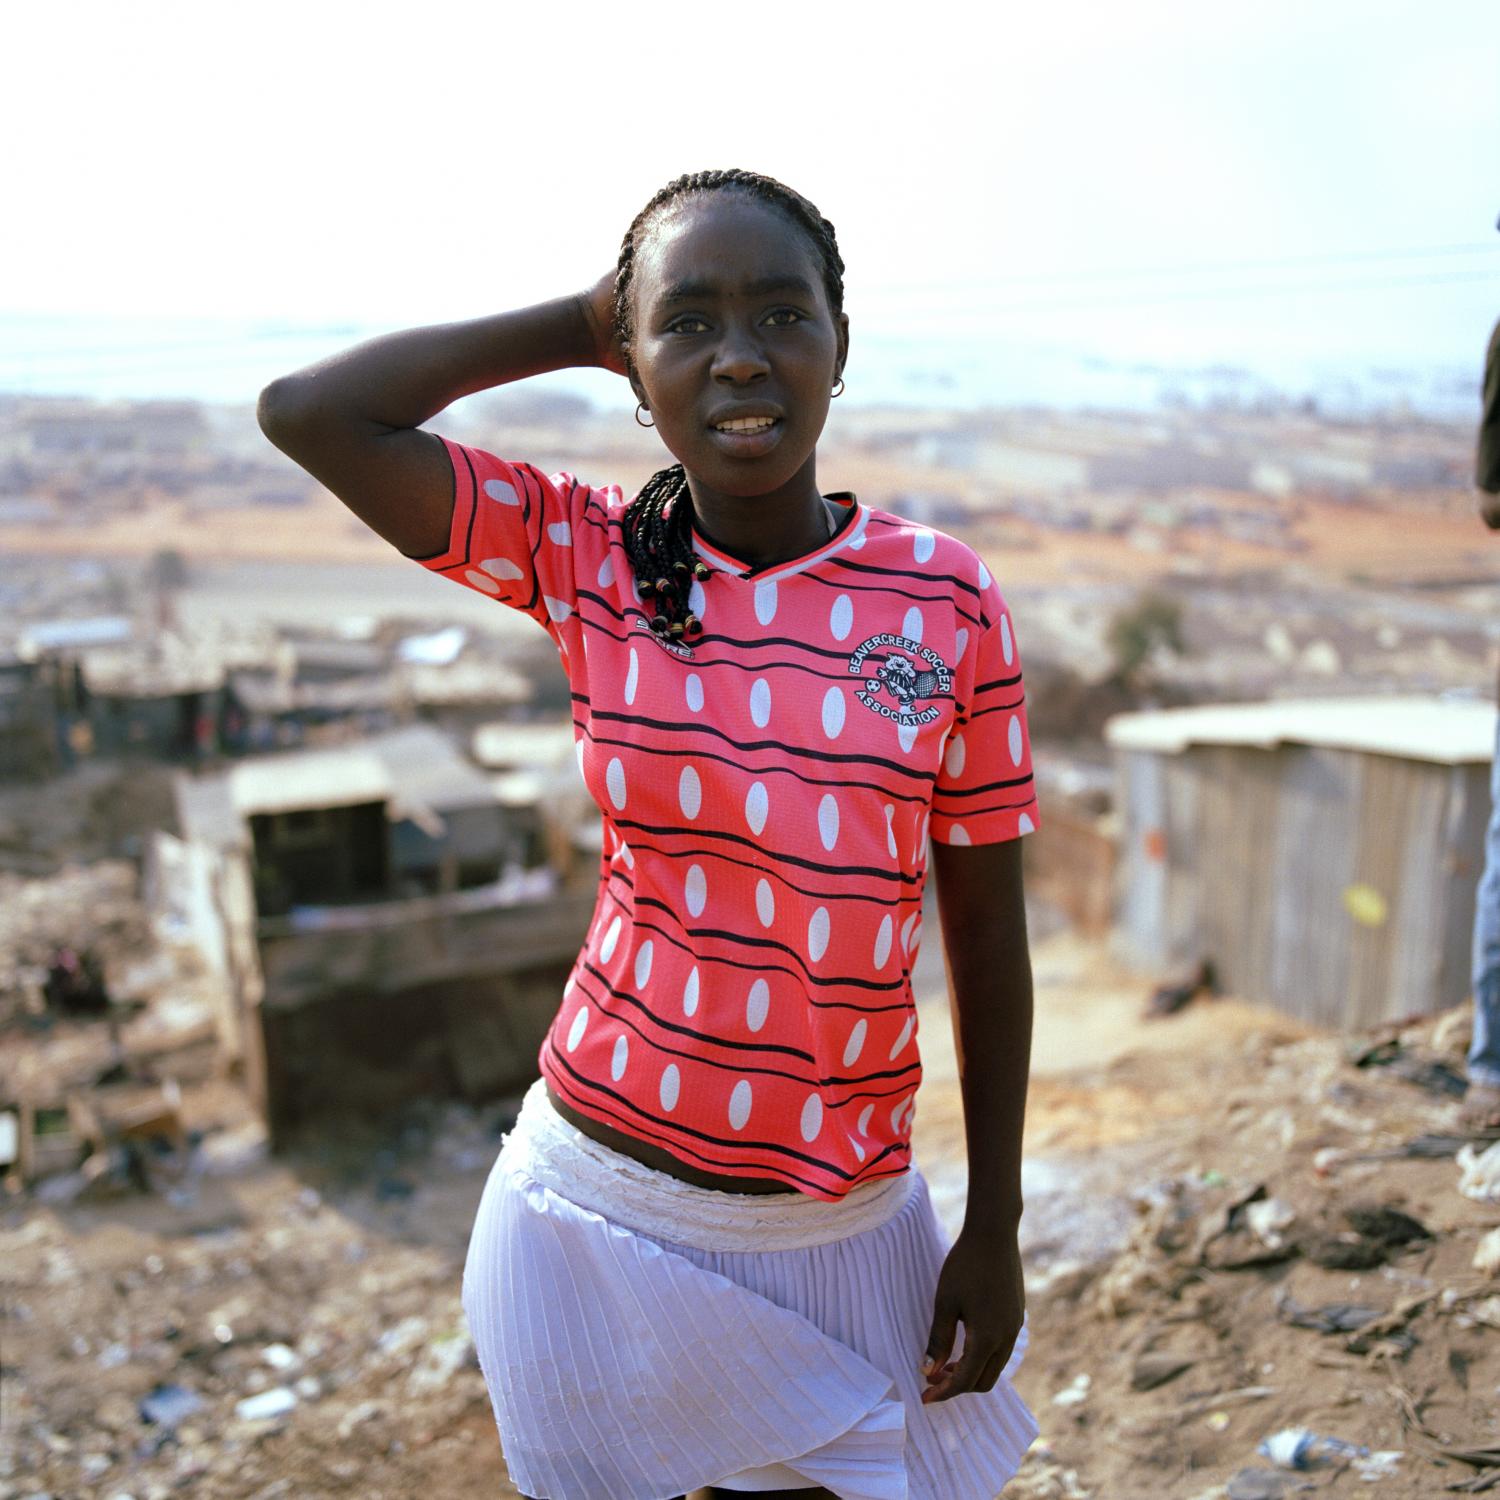 Angola - A resident of a shantytown built over a garbage dump in...